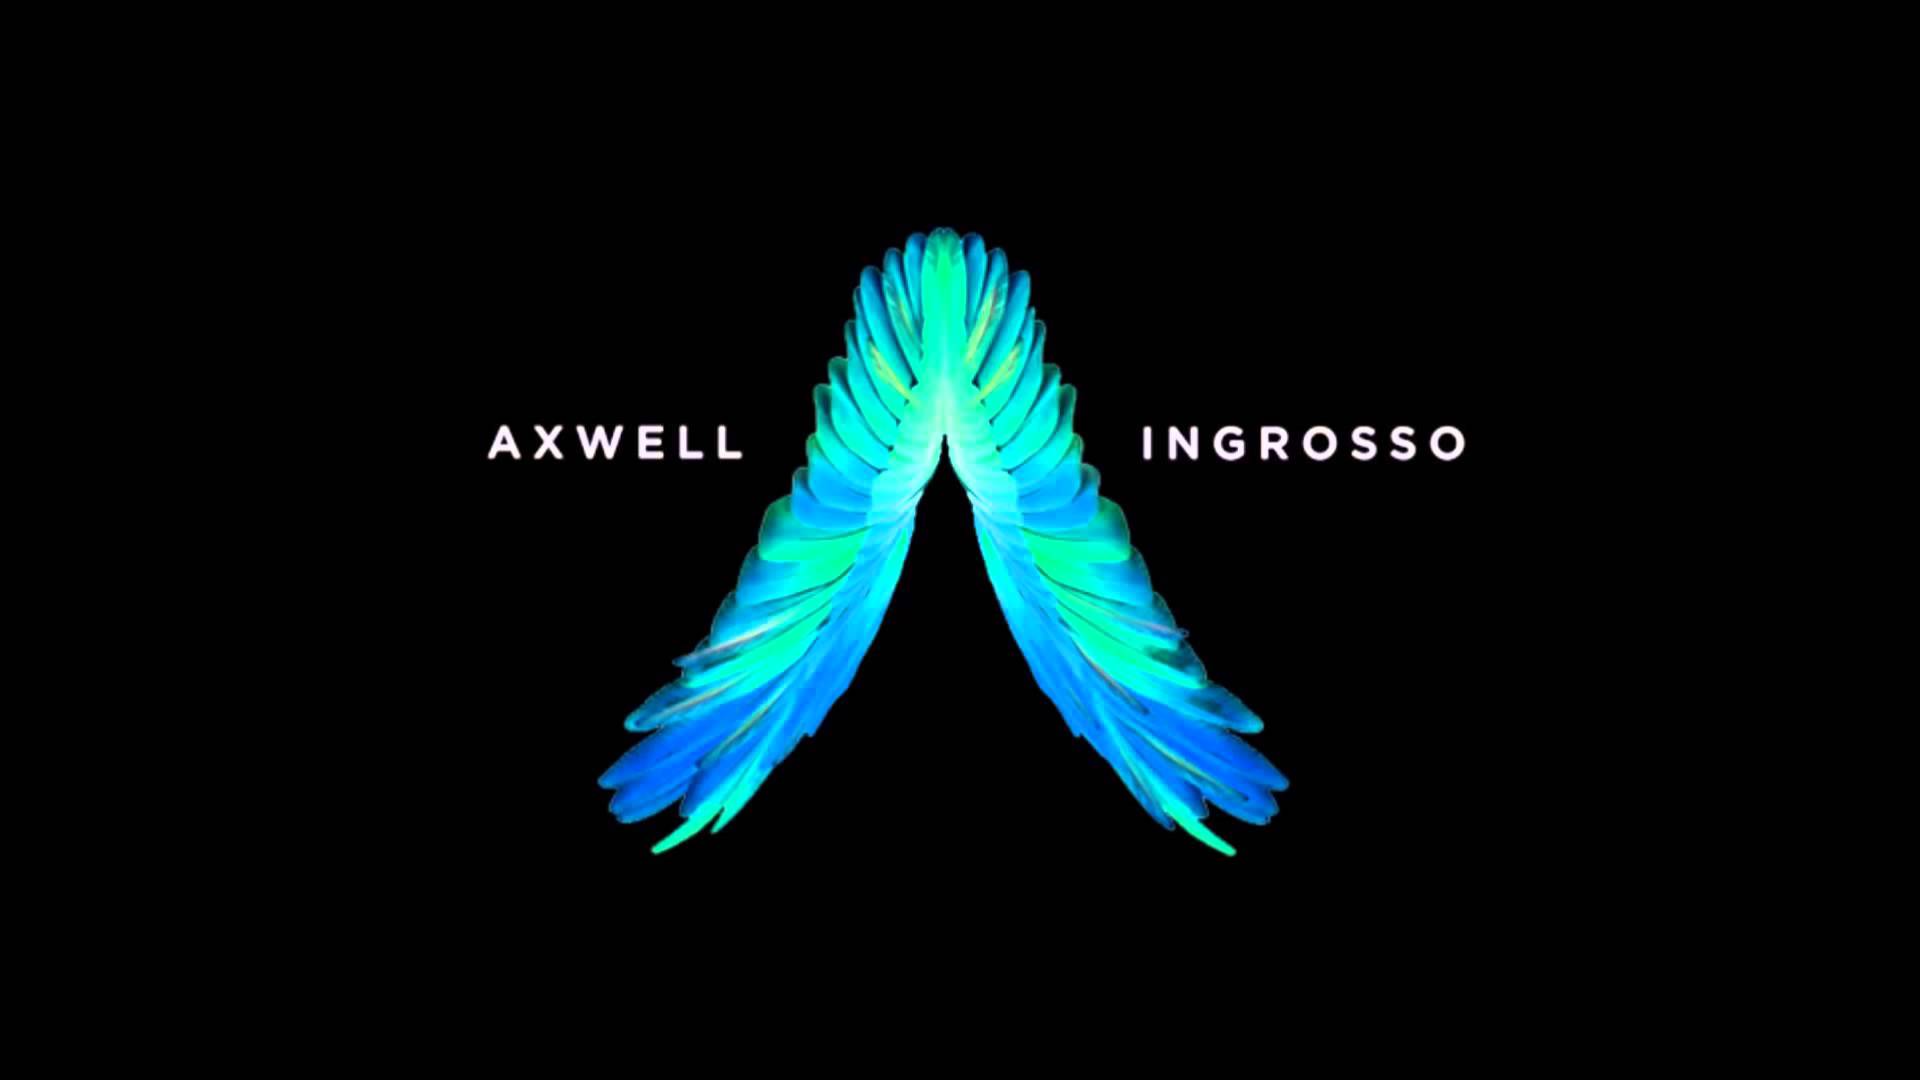 Axwell Ingrosso – More than you know